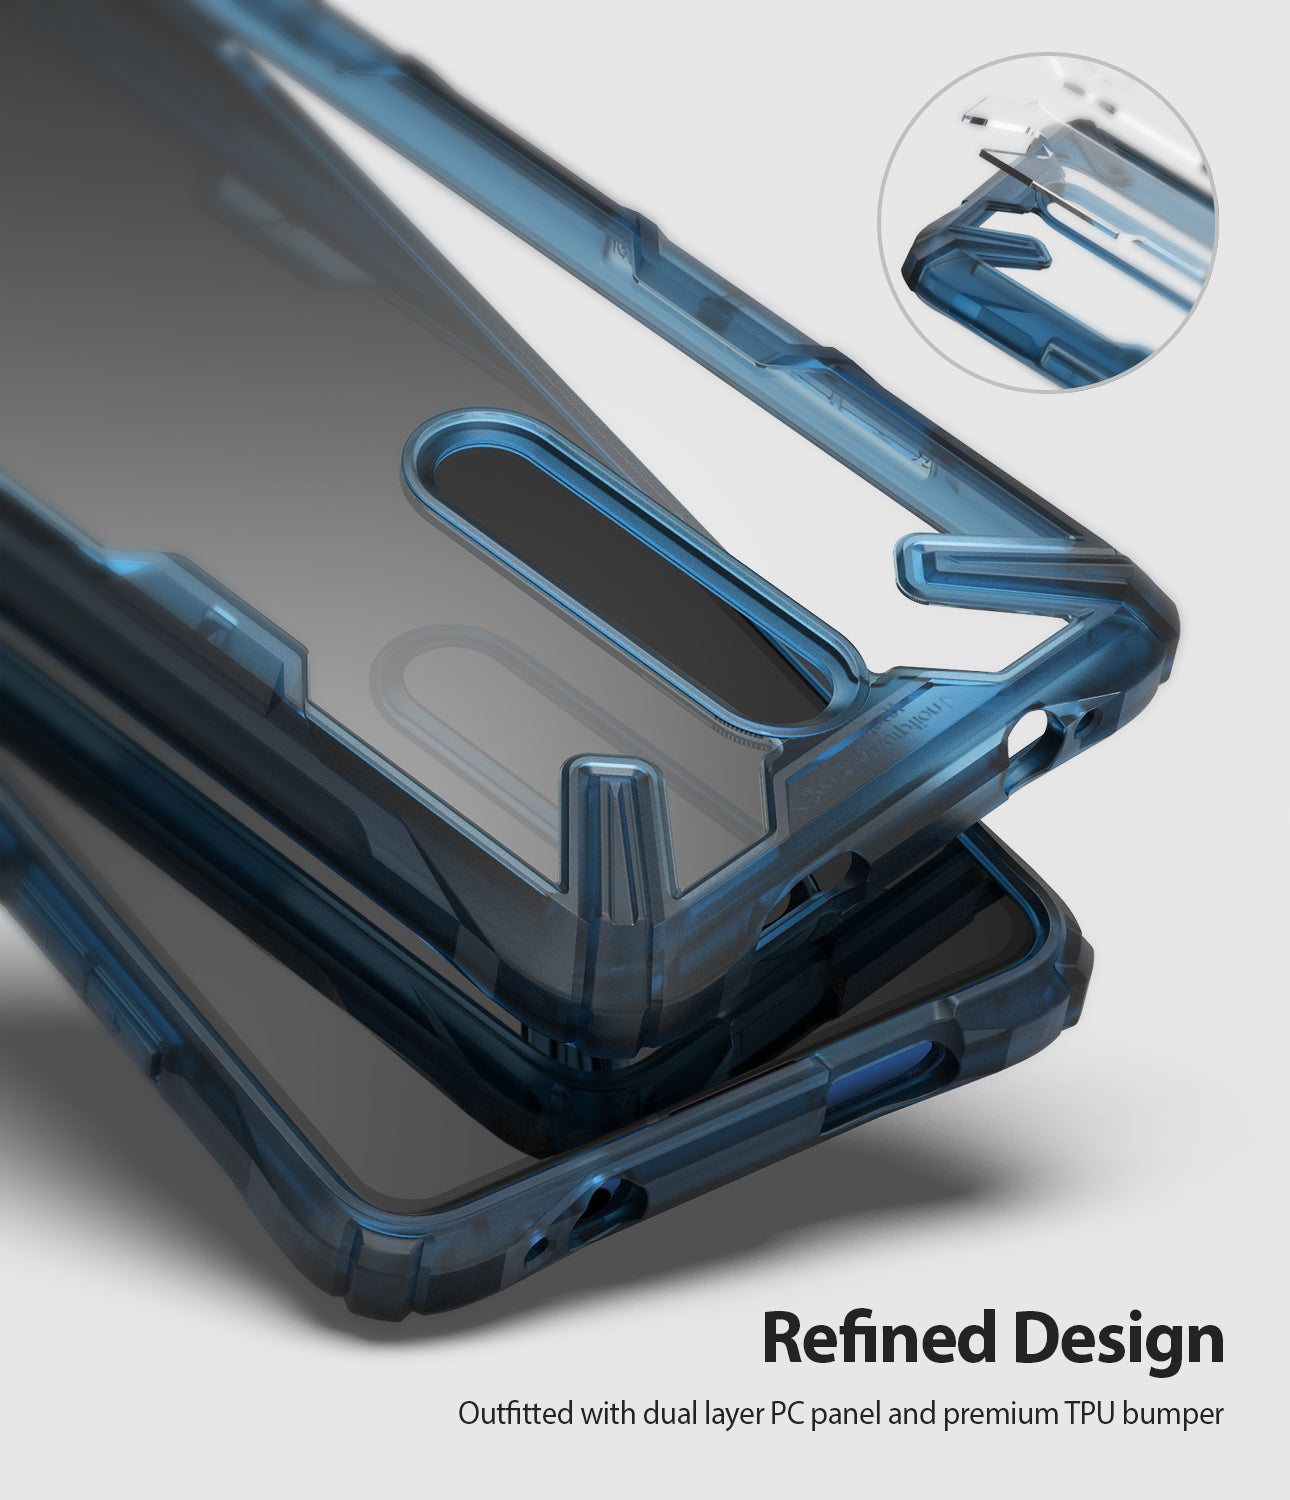 refined design - outfitted with dual layer PC panel and premium TPU bumper